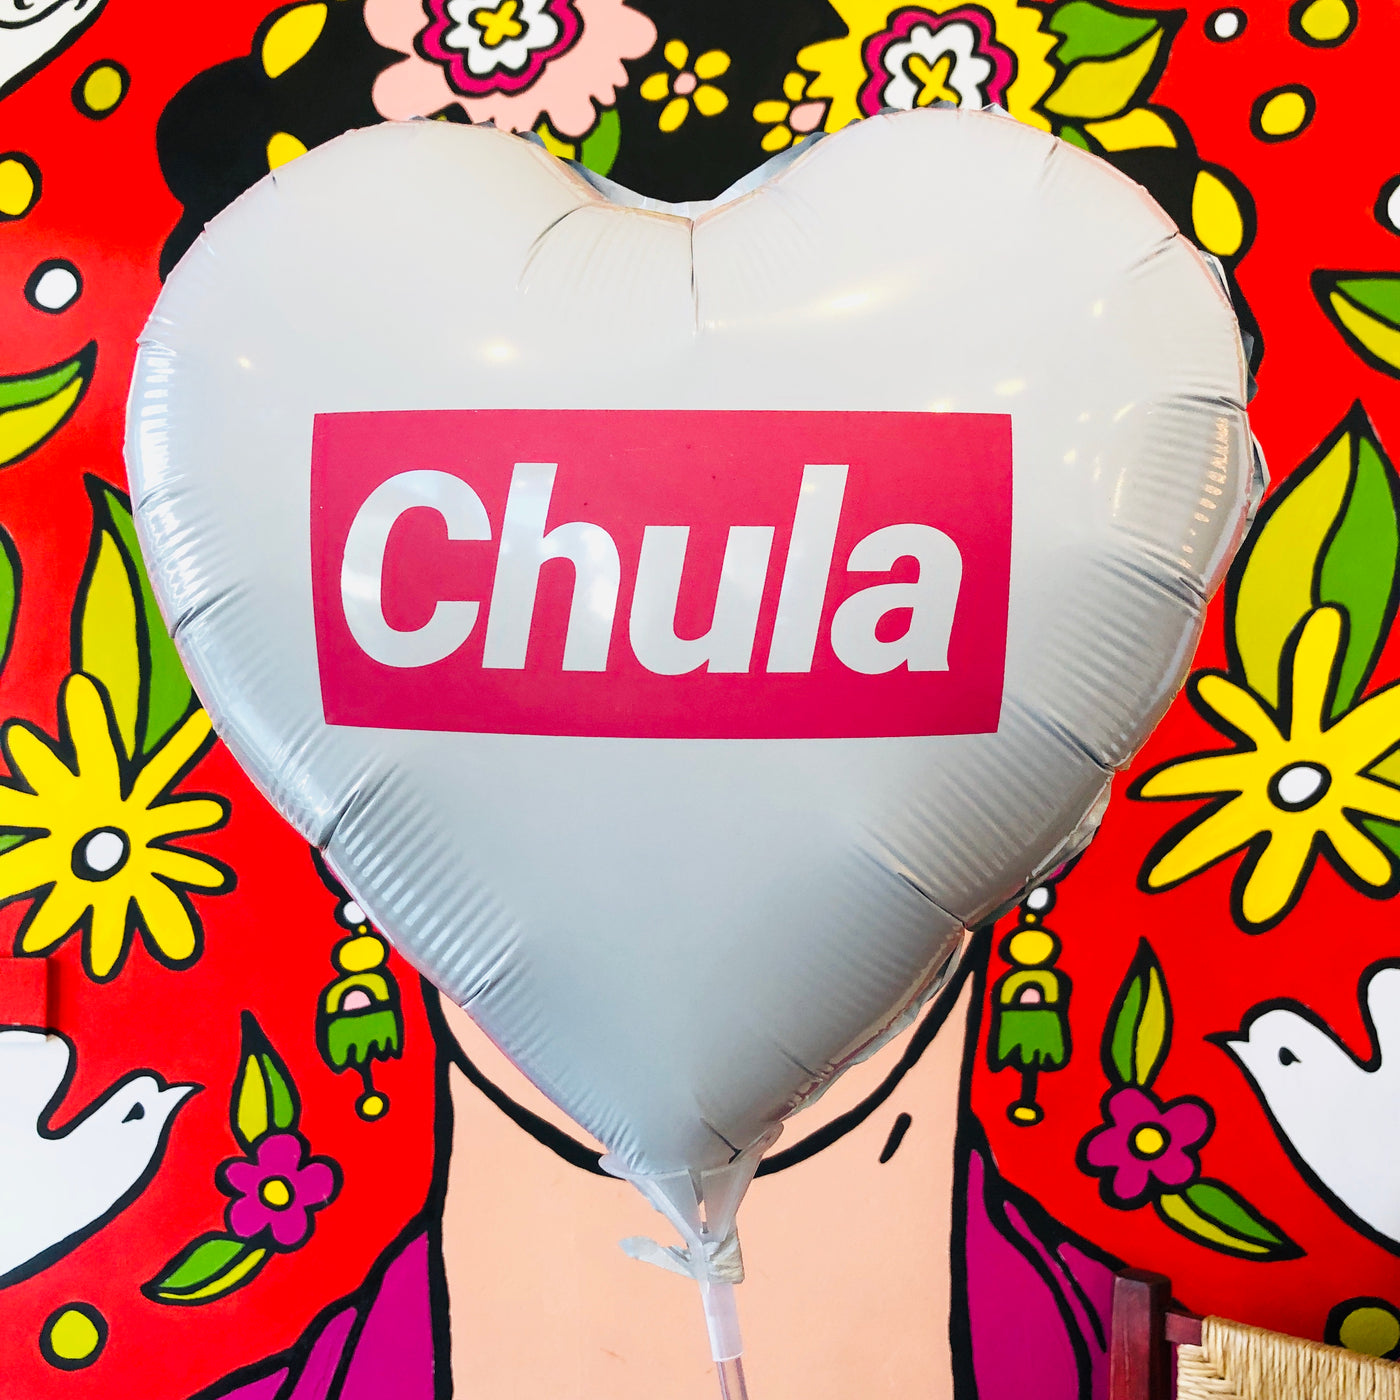 White heart shaped balloon with pink accents that reads, "Chula".